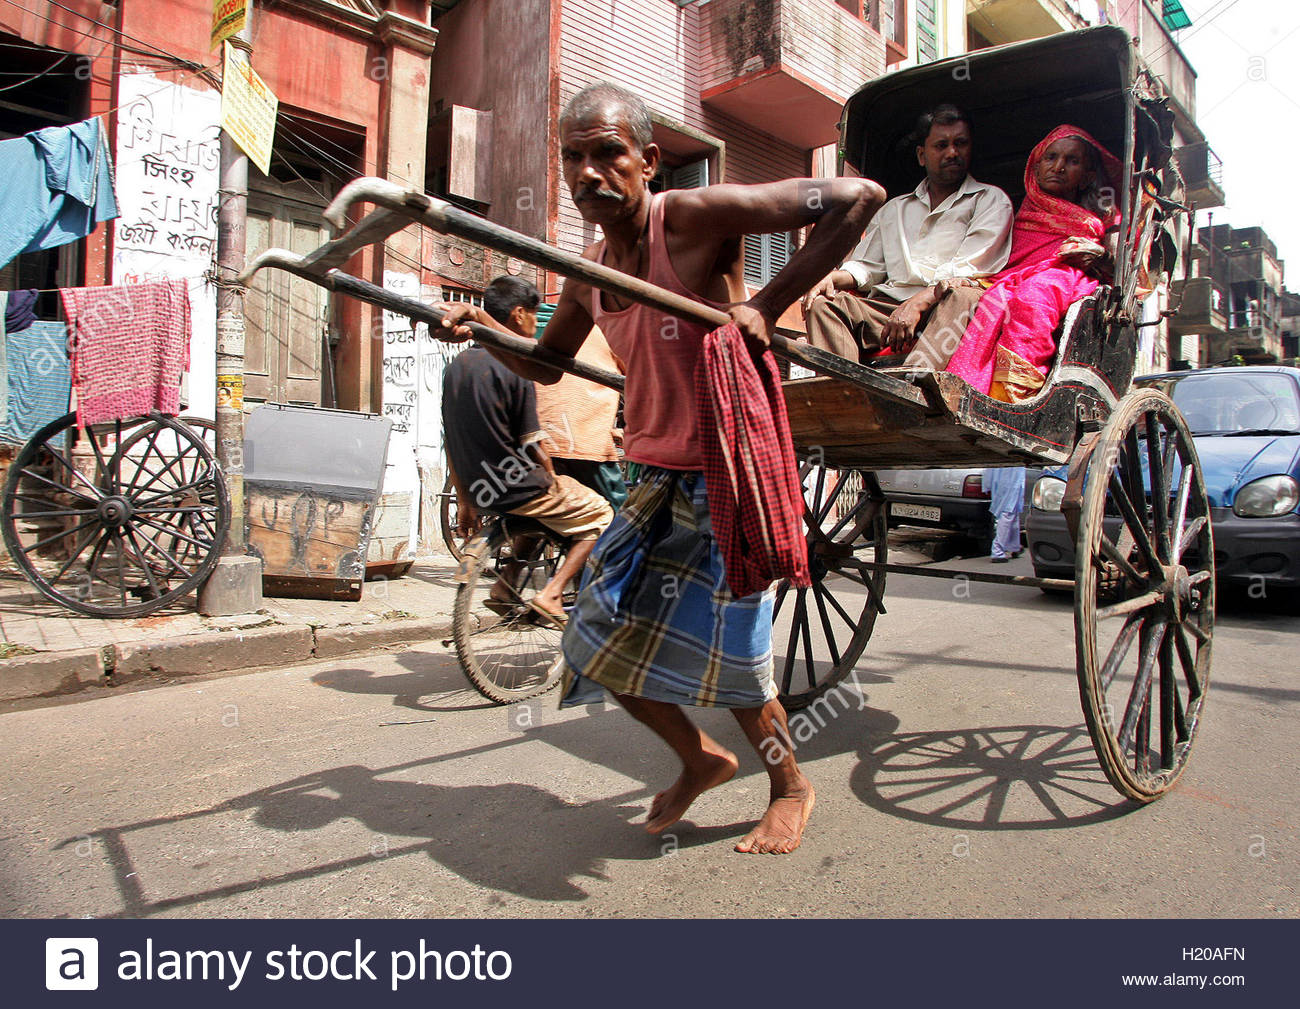 an-indian-hand-pulled-rickshaw-puller-runs-with-passenger-in-the-eastern-H20AFN.jpg